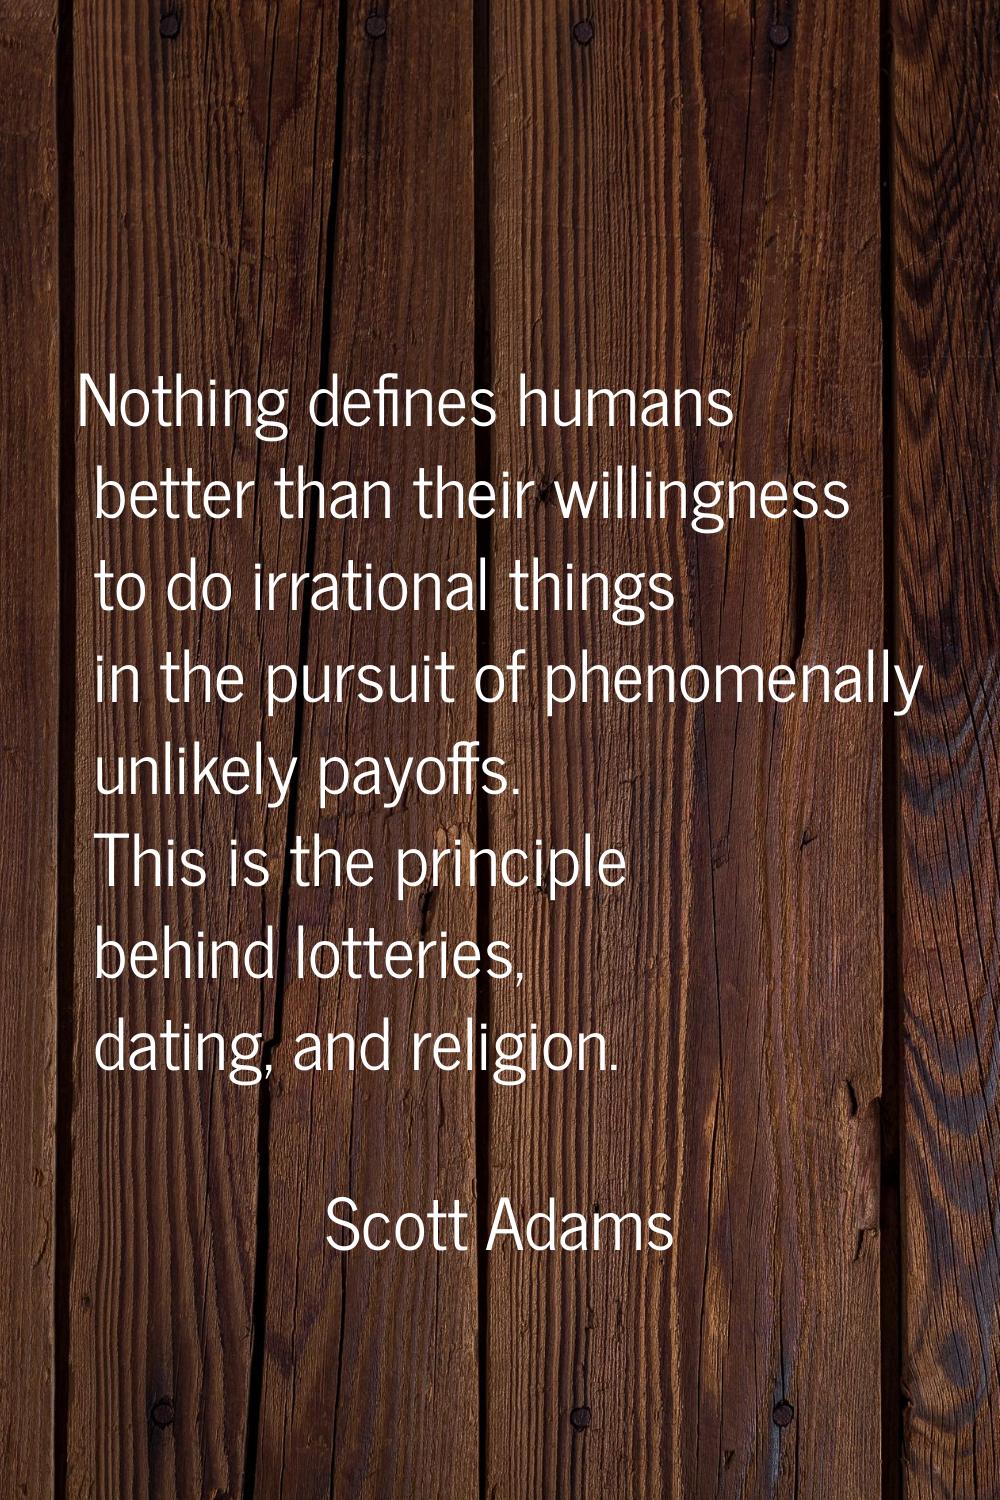 Nothing defines humans better than their willingness to do irrational things in the pursuit of phen